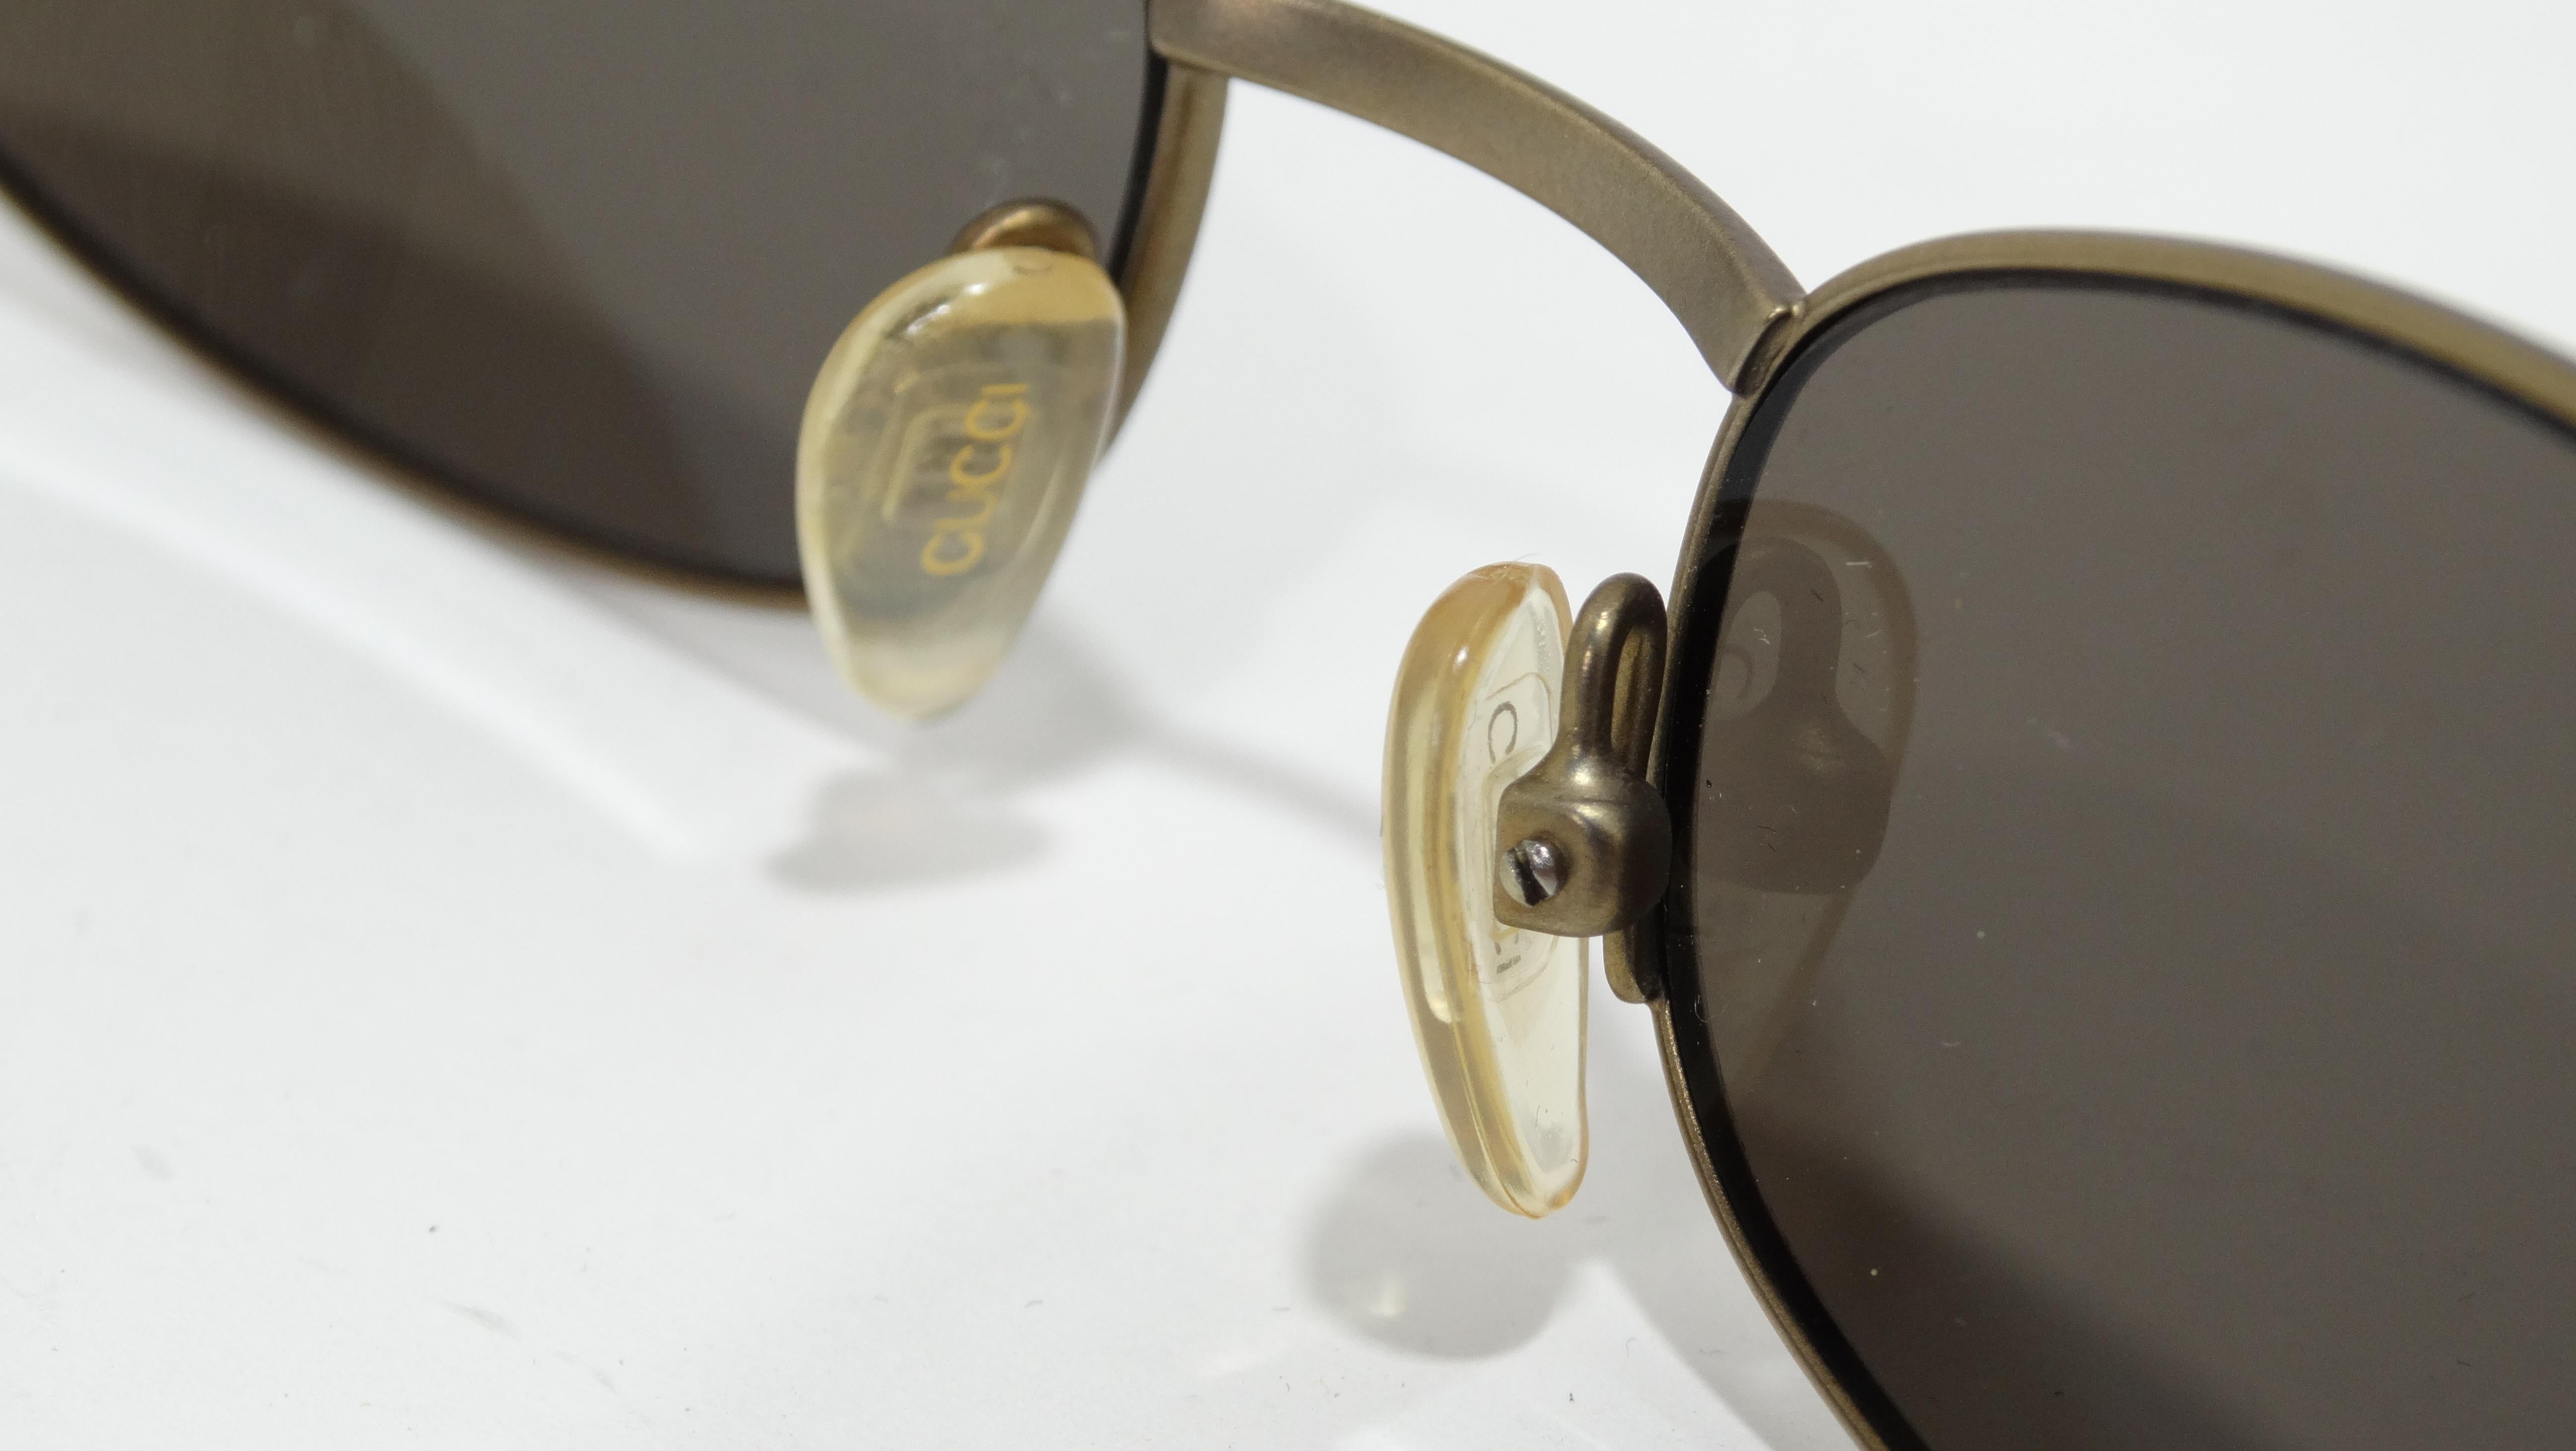 Tom Ford for Gucci Gold & Tortoise Shell Oval Sunglasses In Excellent Condition For Sale In Scottsdale, AZ